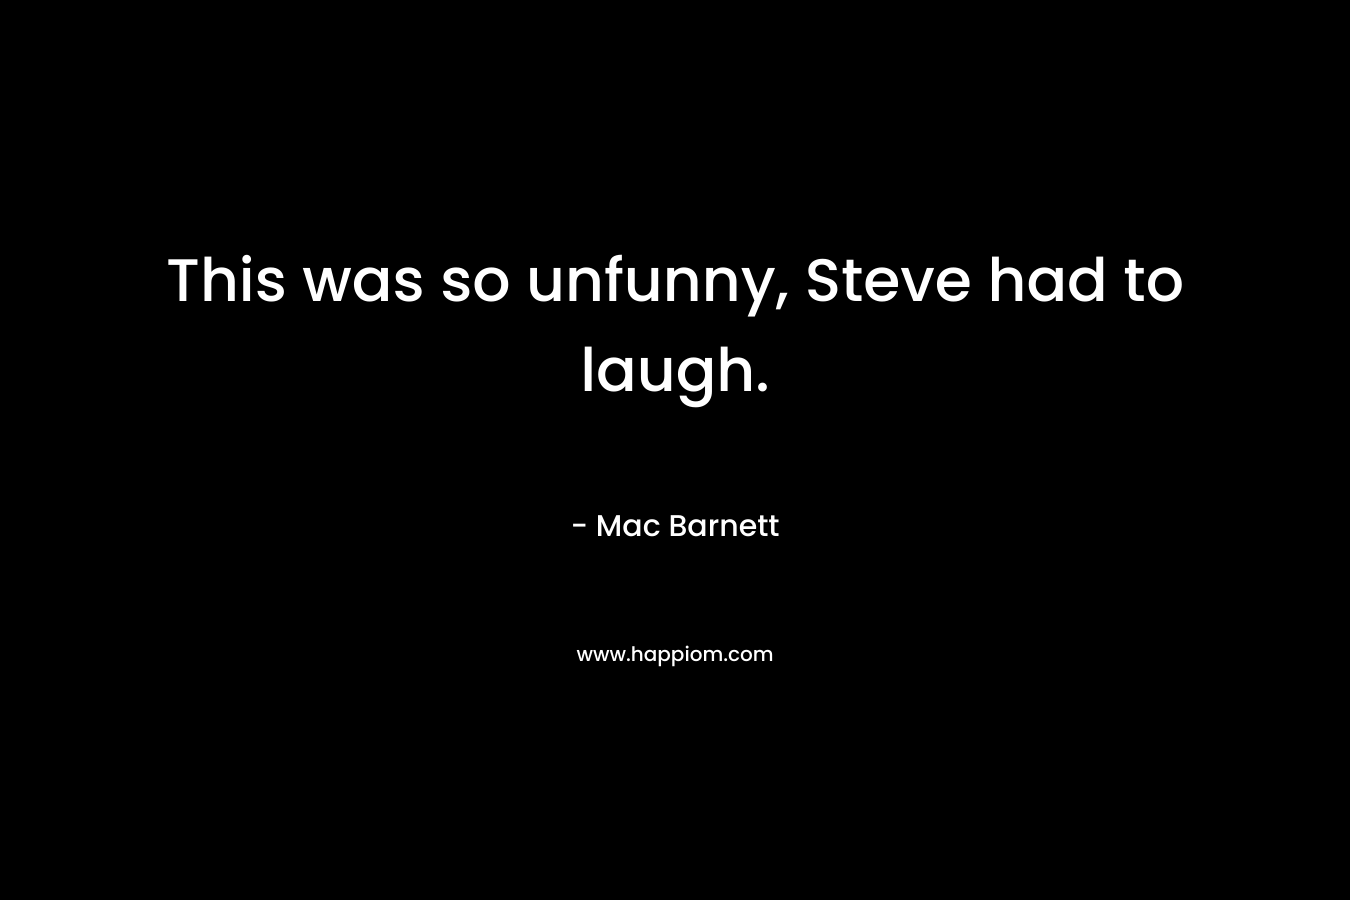 This was so unfunny, Steve had to laugh. – Mac Barnett